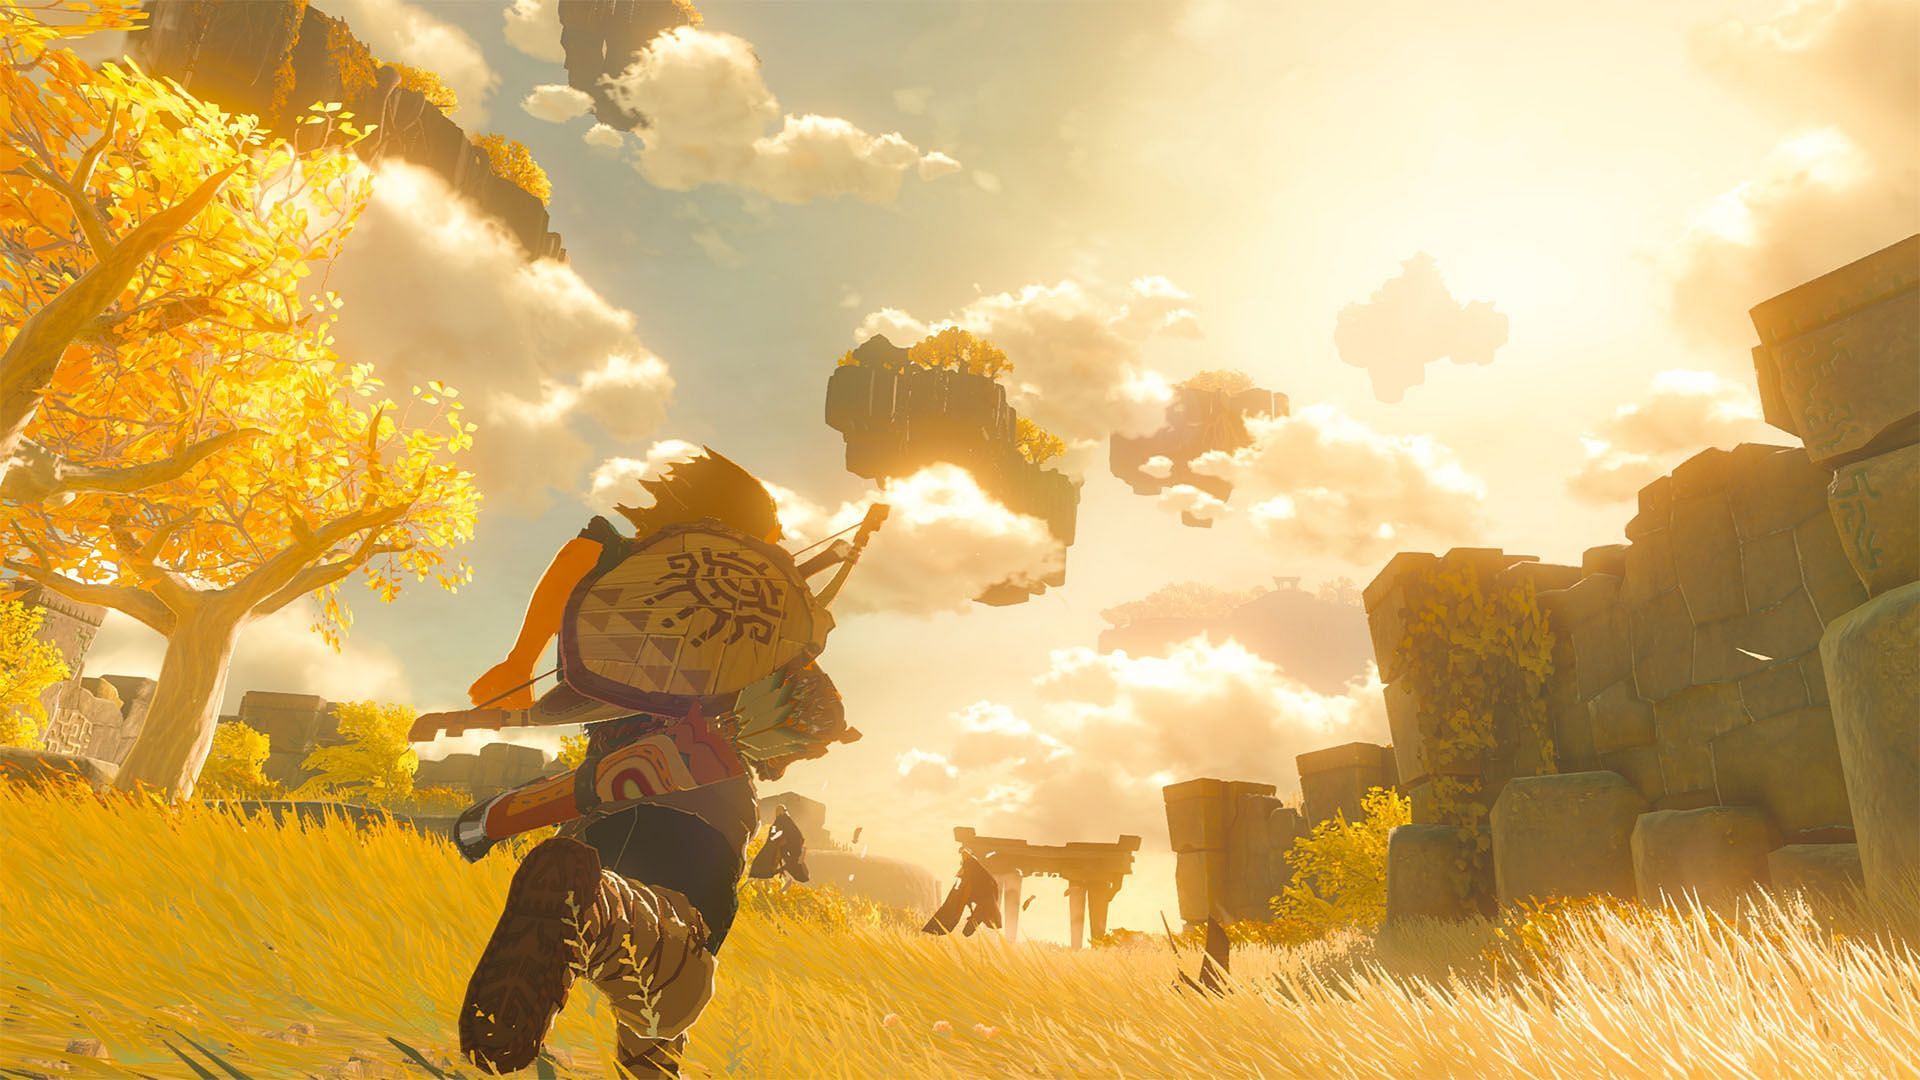 How to Play The Legend of Zelda: Breath of the Wild on PC